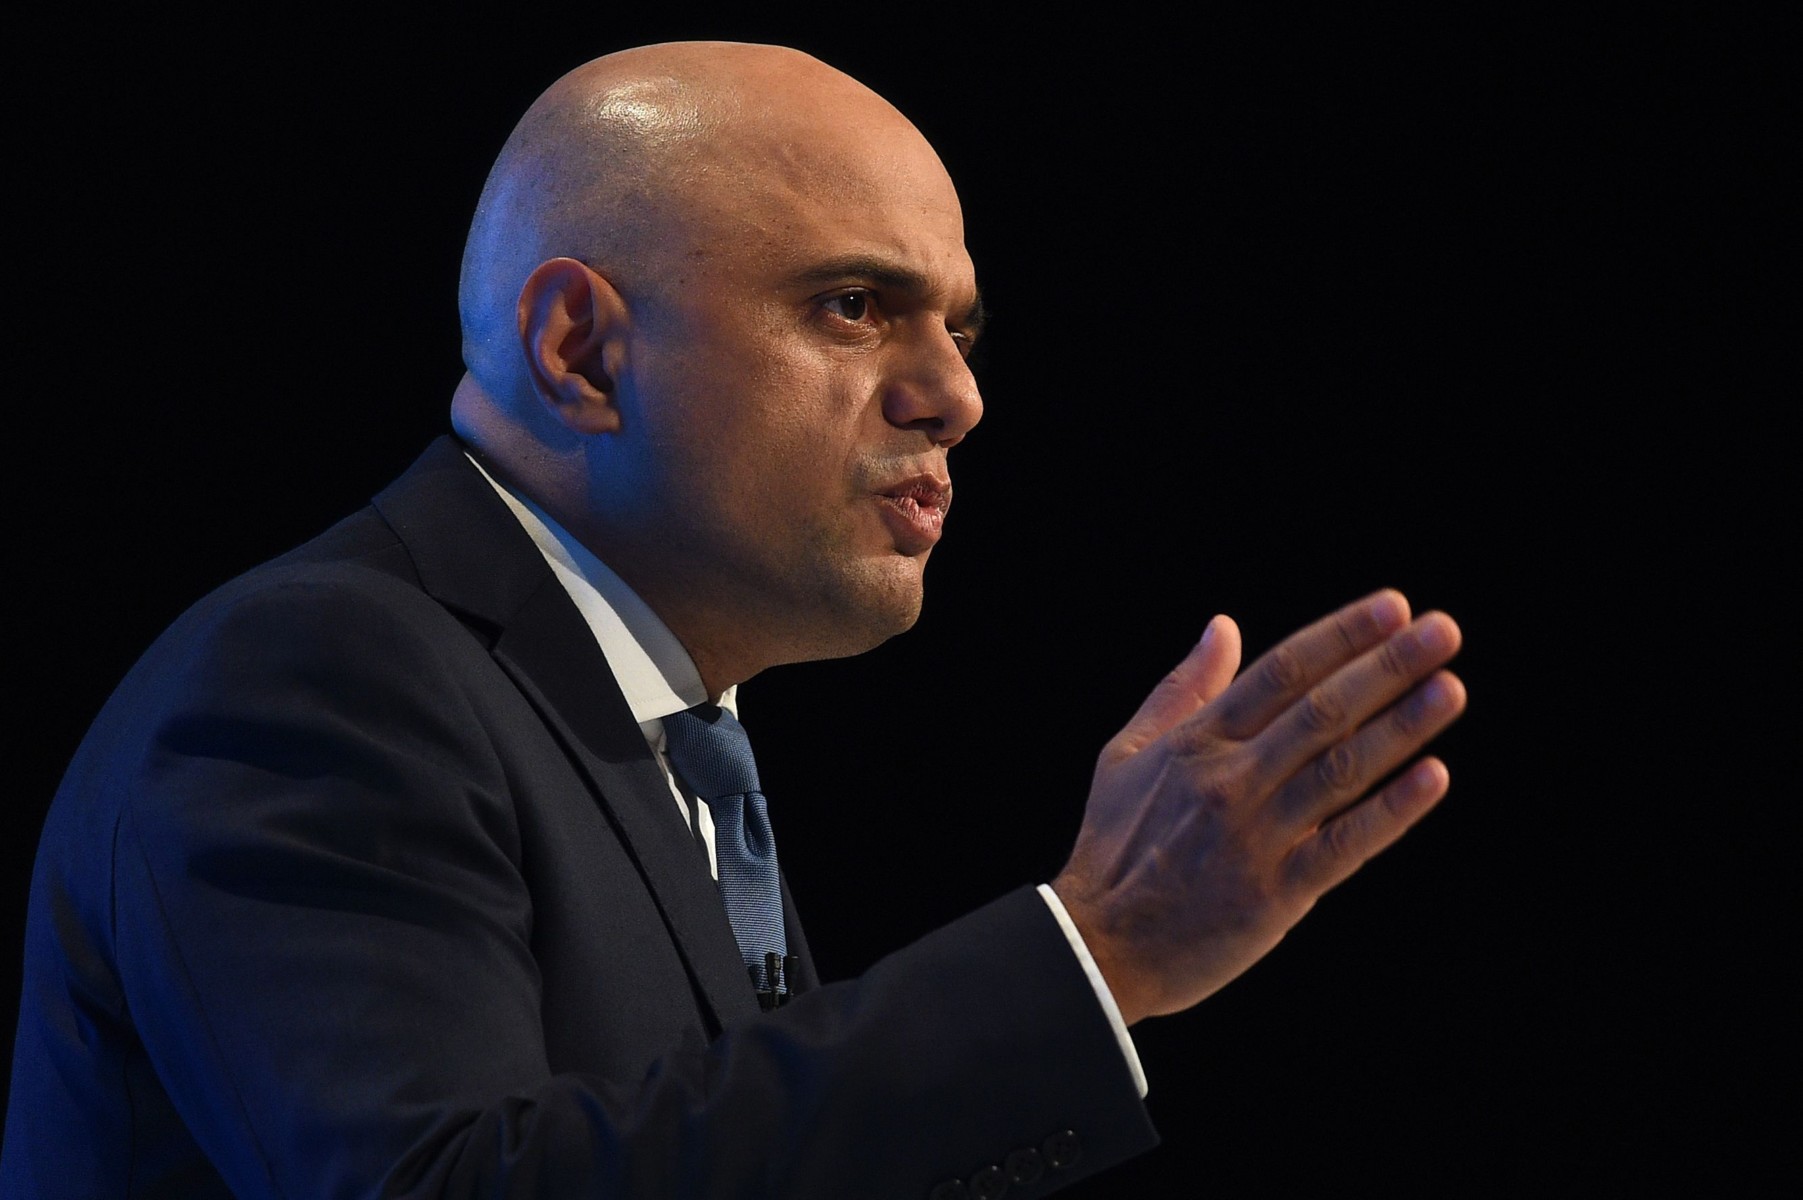 Sajid Javid's decision to quit as Chancellor prompted warning shots to current Cabinet ministers to watch their backs